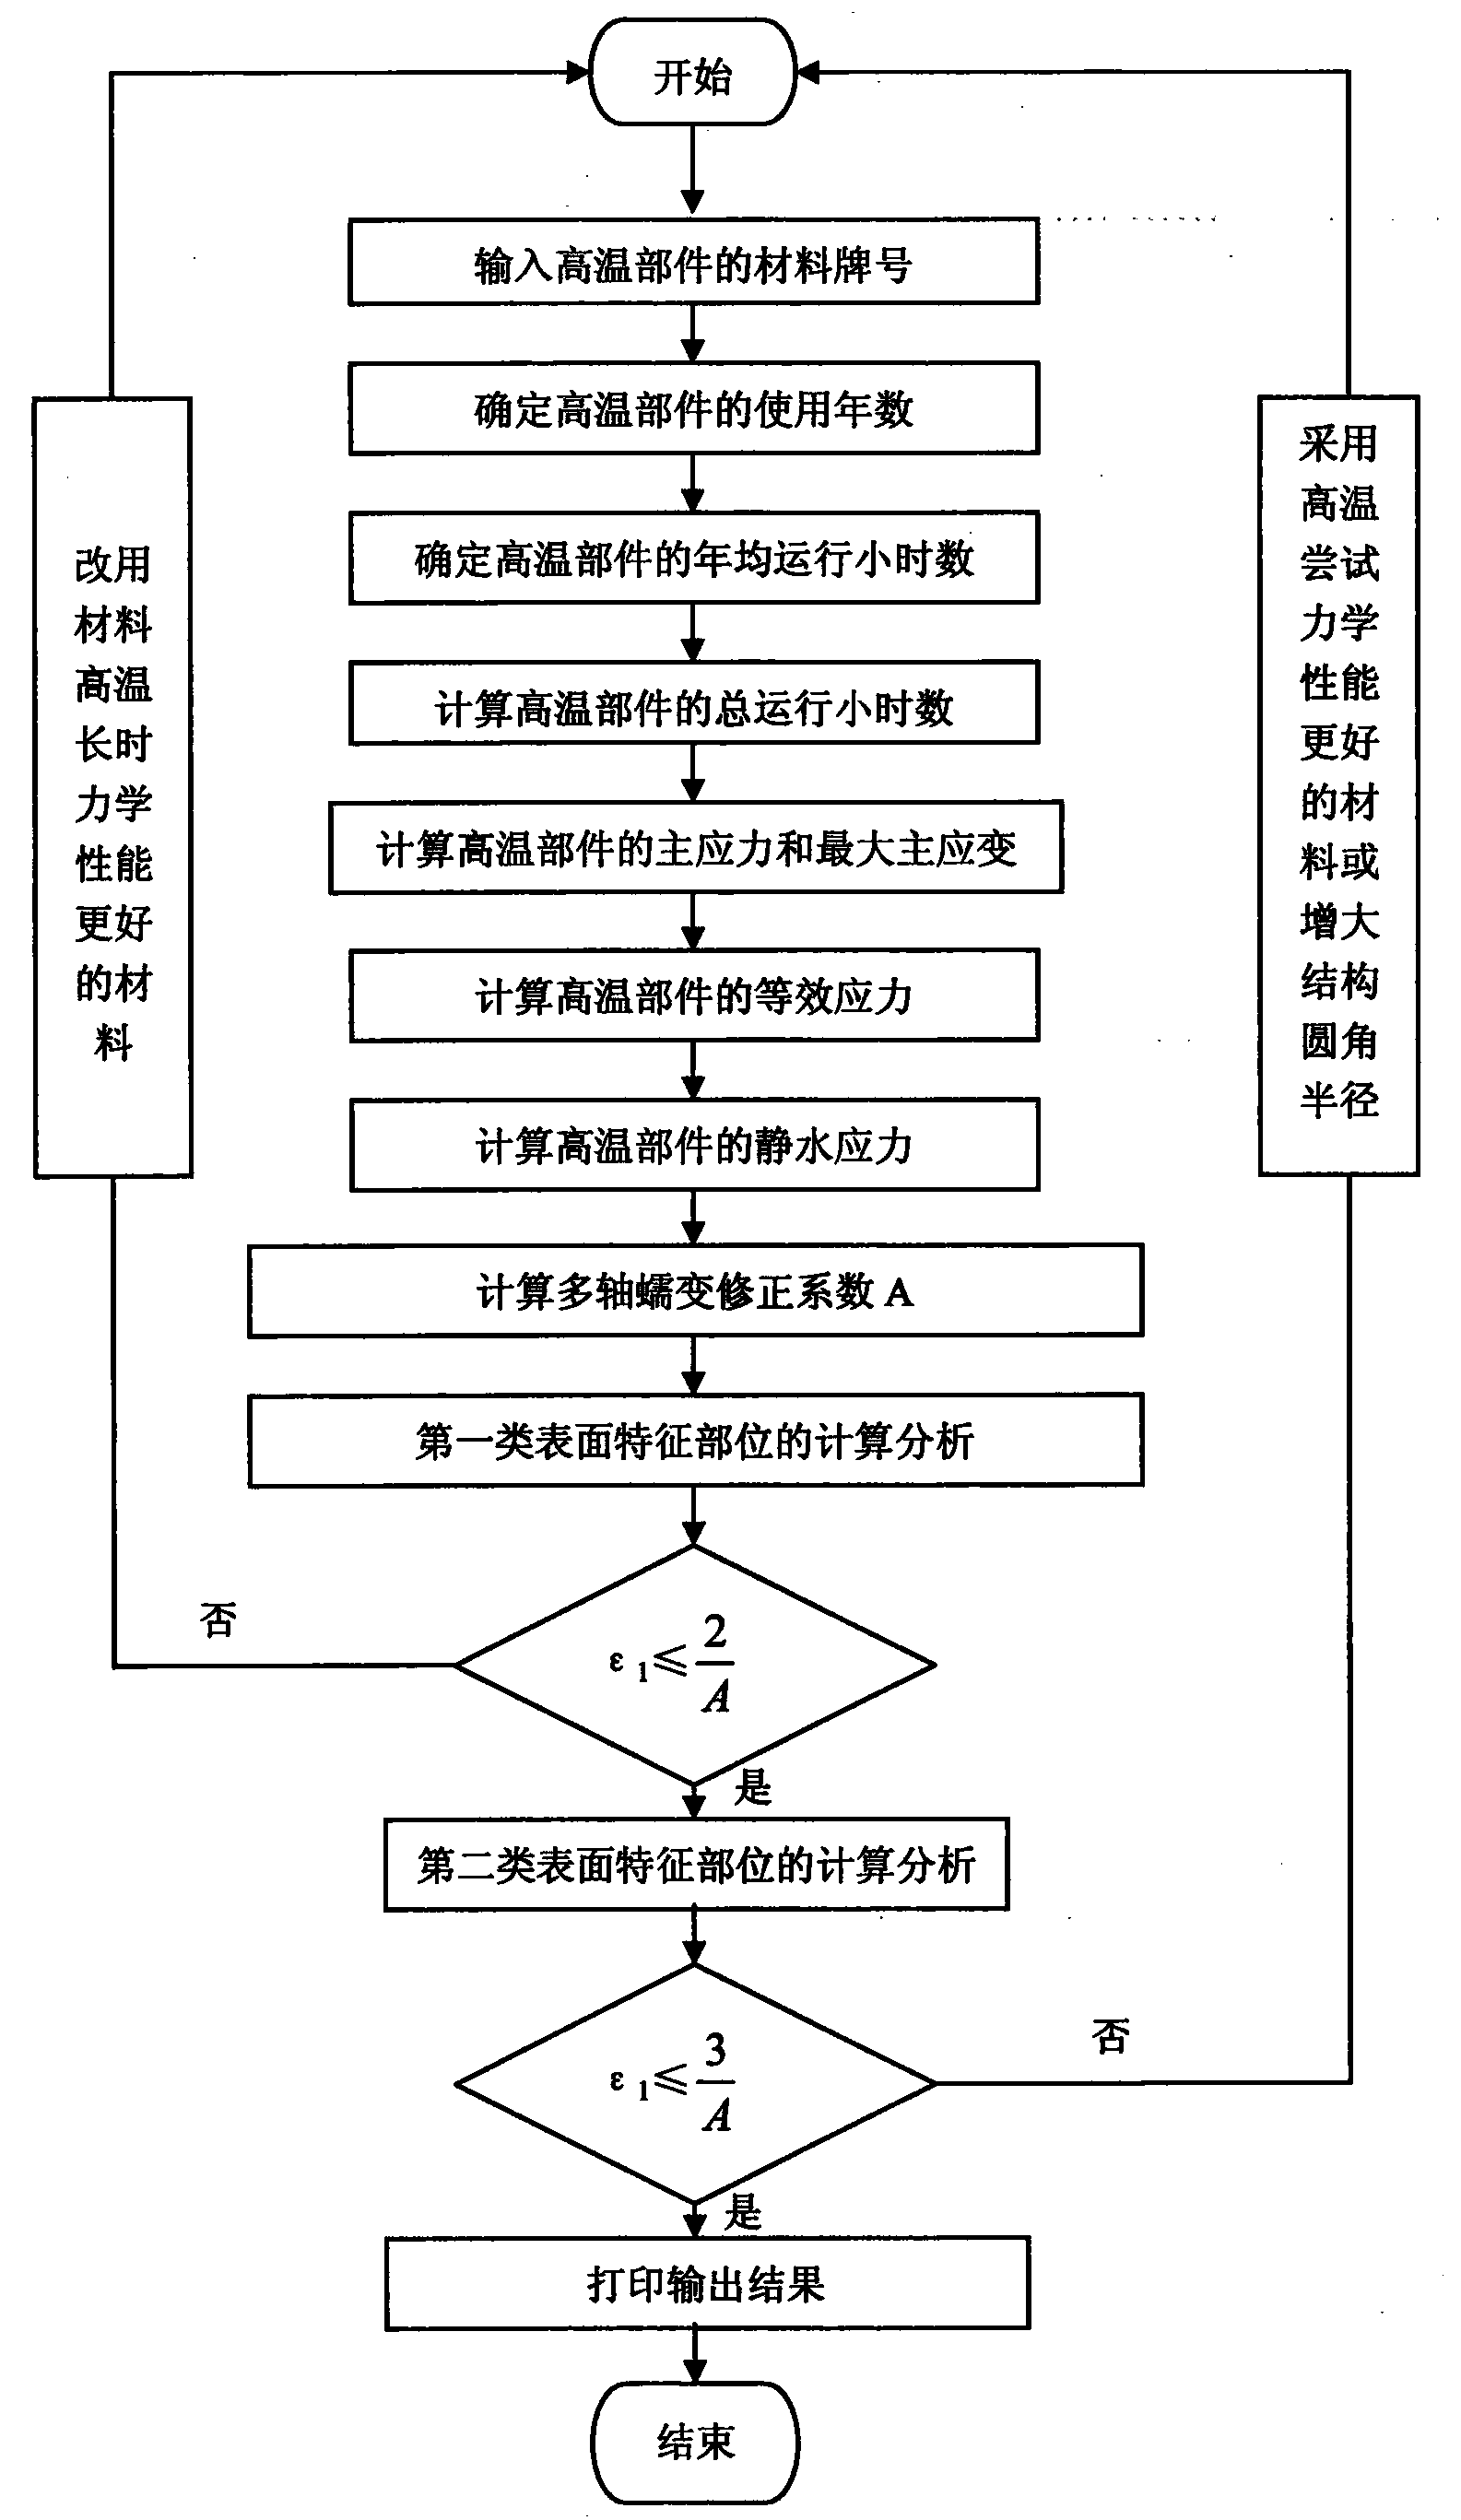 Monitoring method for creep deformation design of high-temperature part of thermal power generating unit